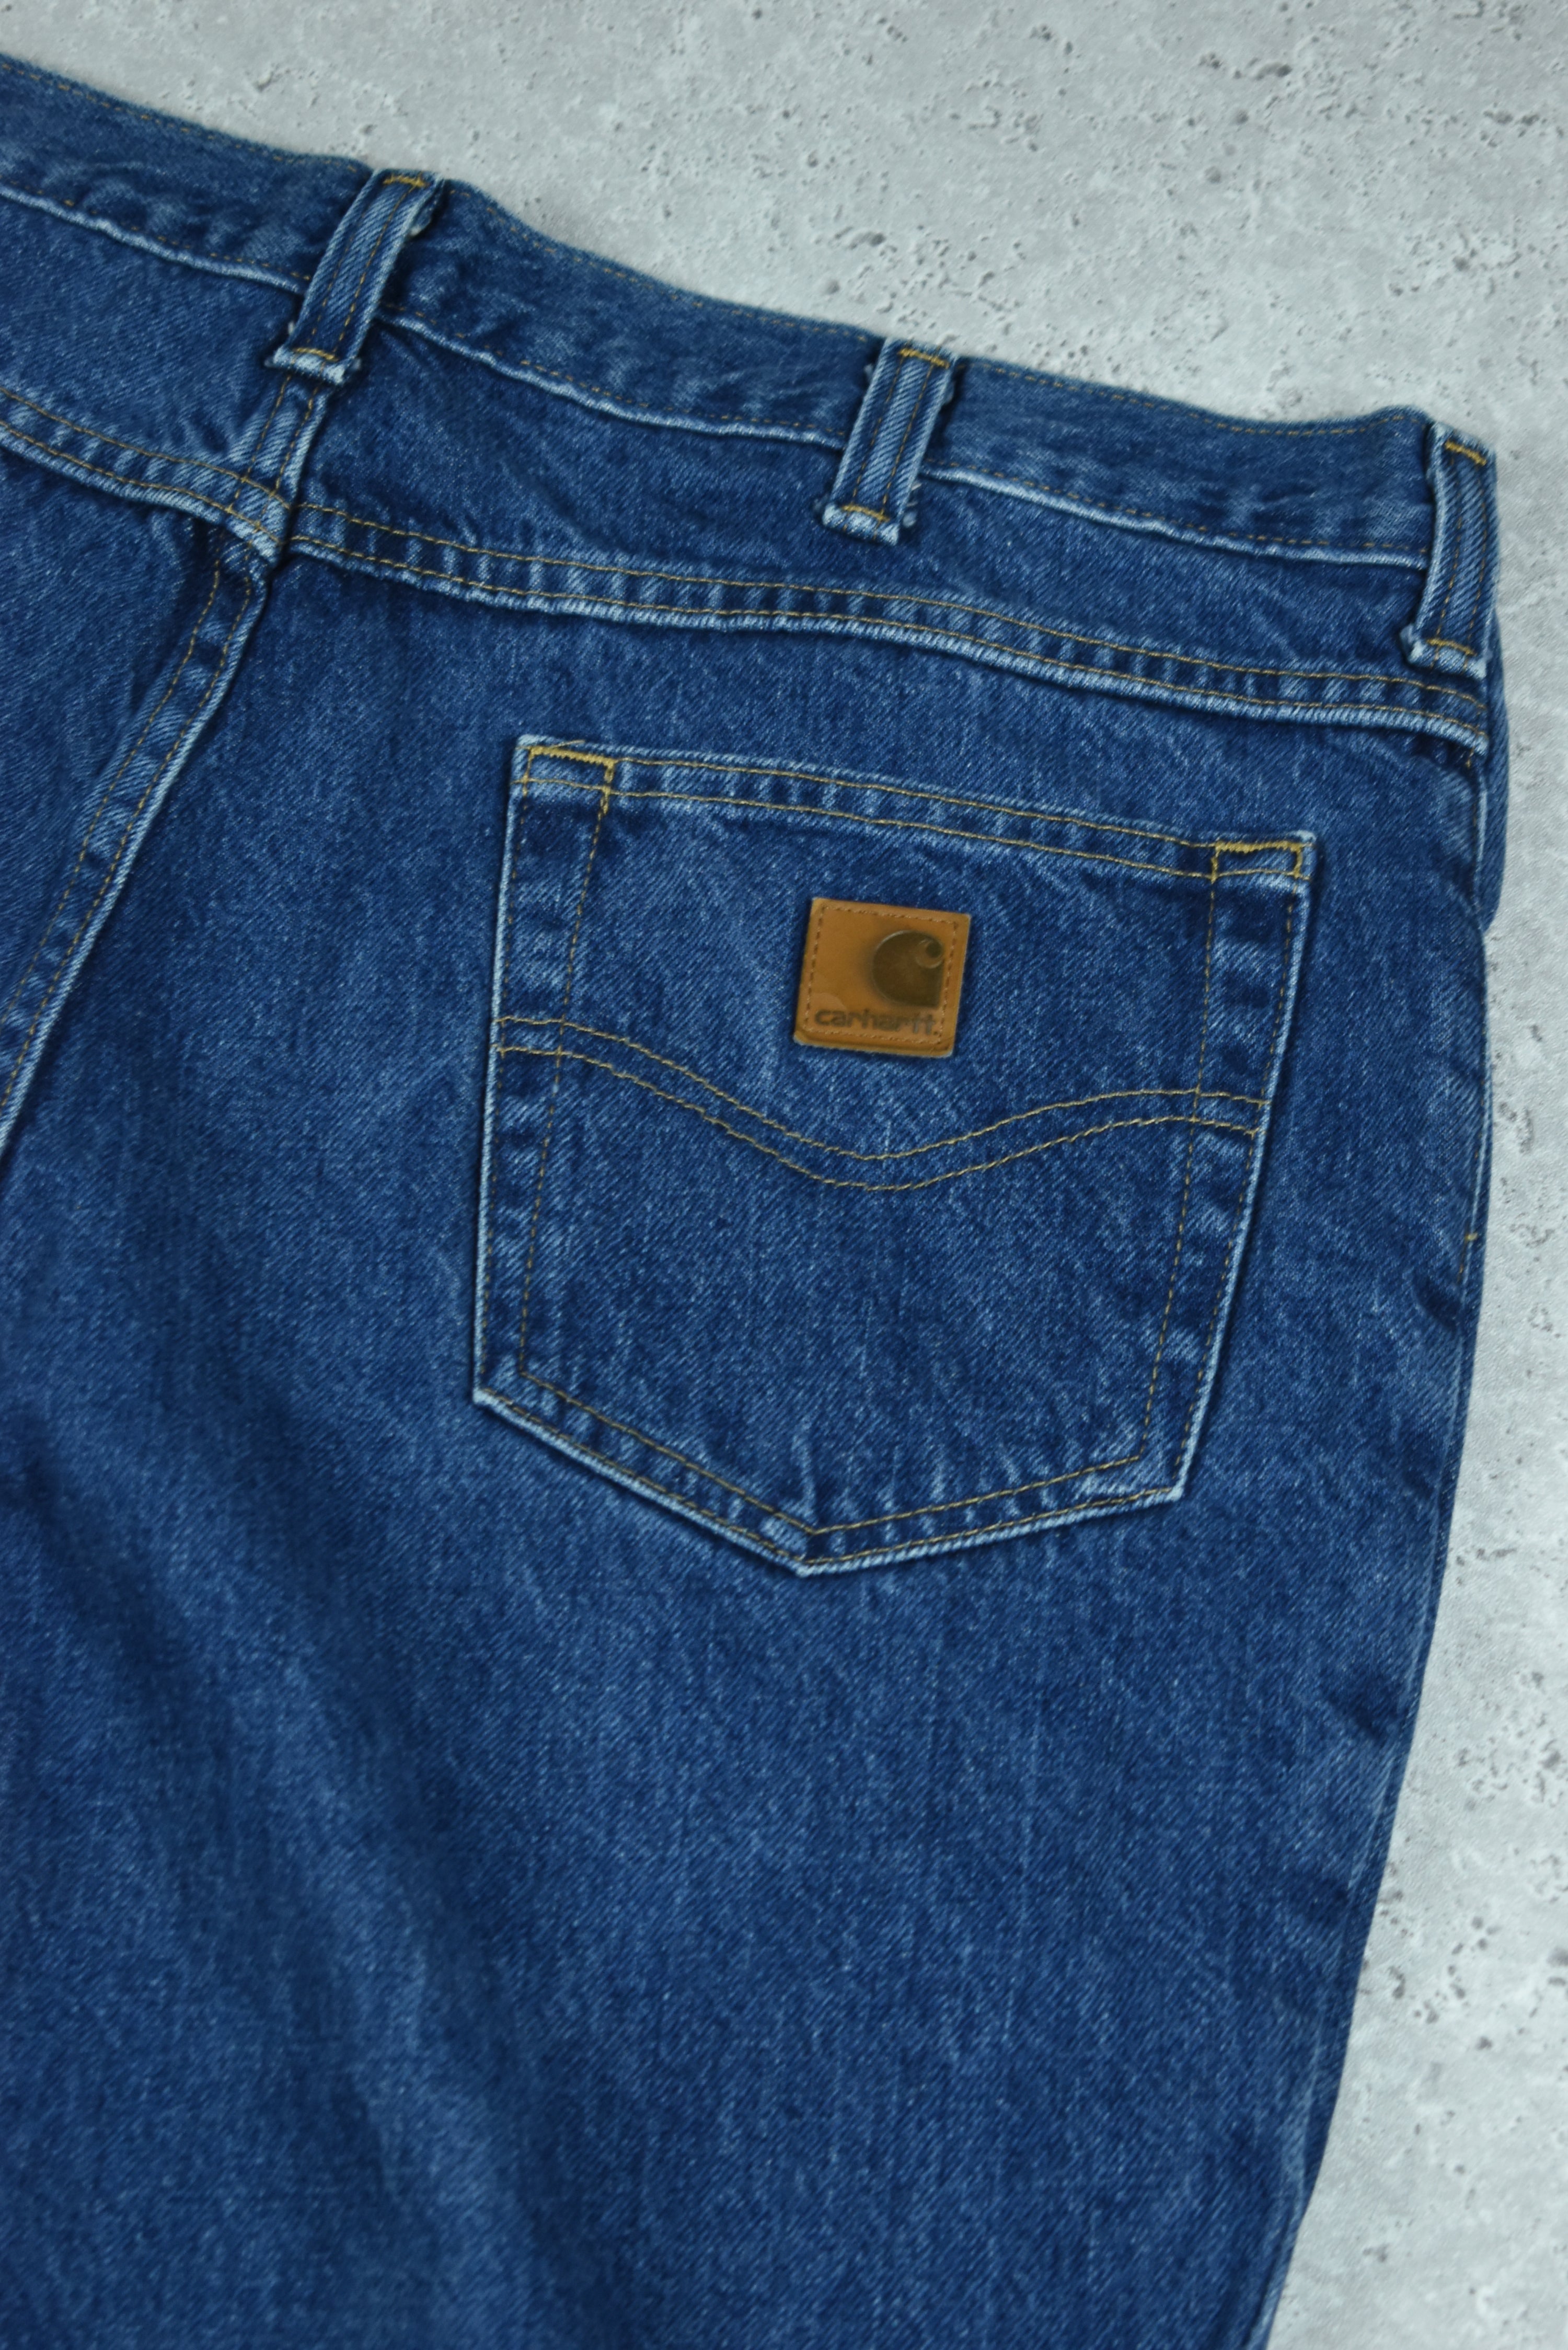 Vintage Carhartt Relaxed Fit Denim Jeans 36x32